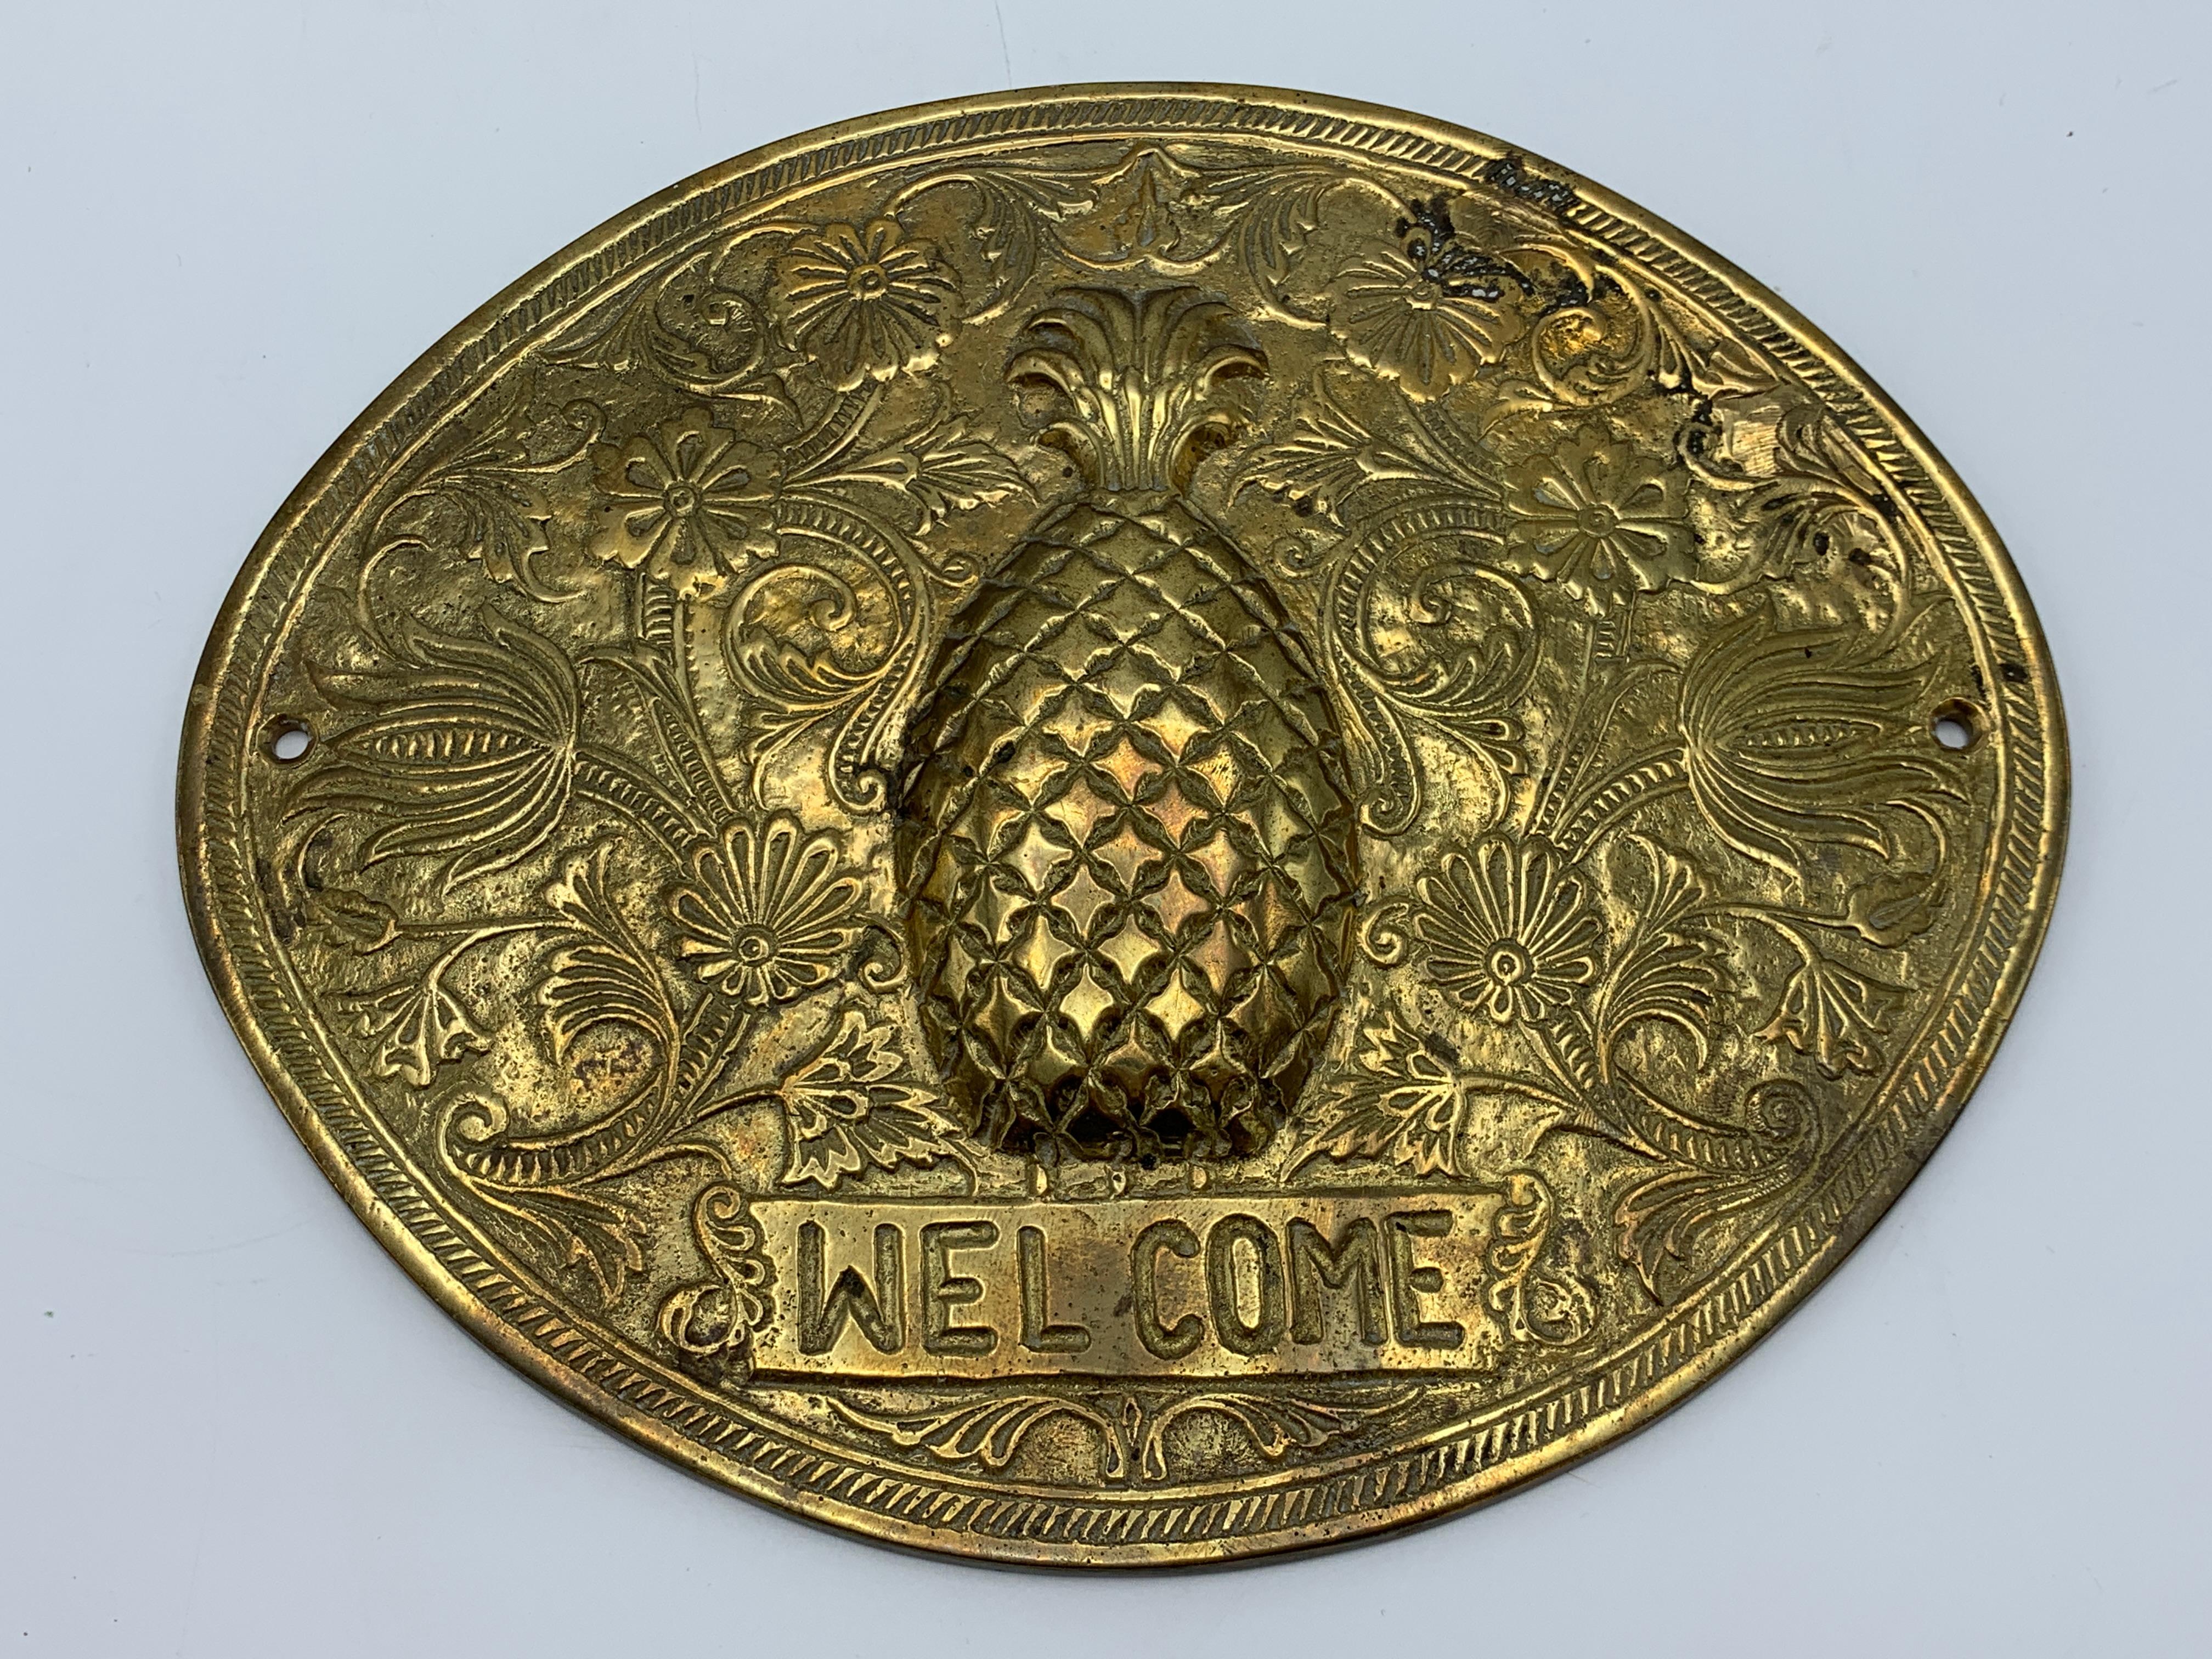 Listed is a gorgeous, 1970s solid-brass pineapple 'Welcome' wall plaque. Heavily detailed with a raised pineapple in the center, with floral motif surrounding as a border, and 'Welcome' stamped beneath. Heavy, weighing 1.5lbs. Includes brass screws.